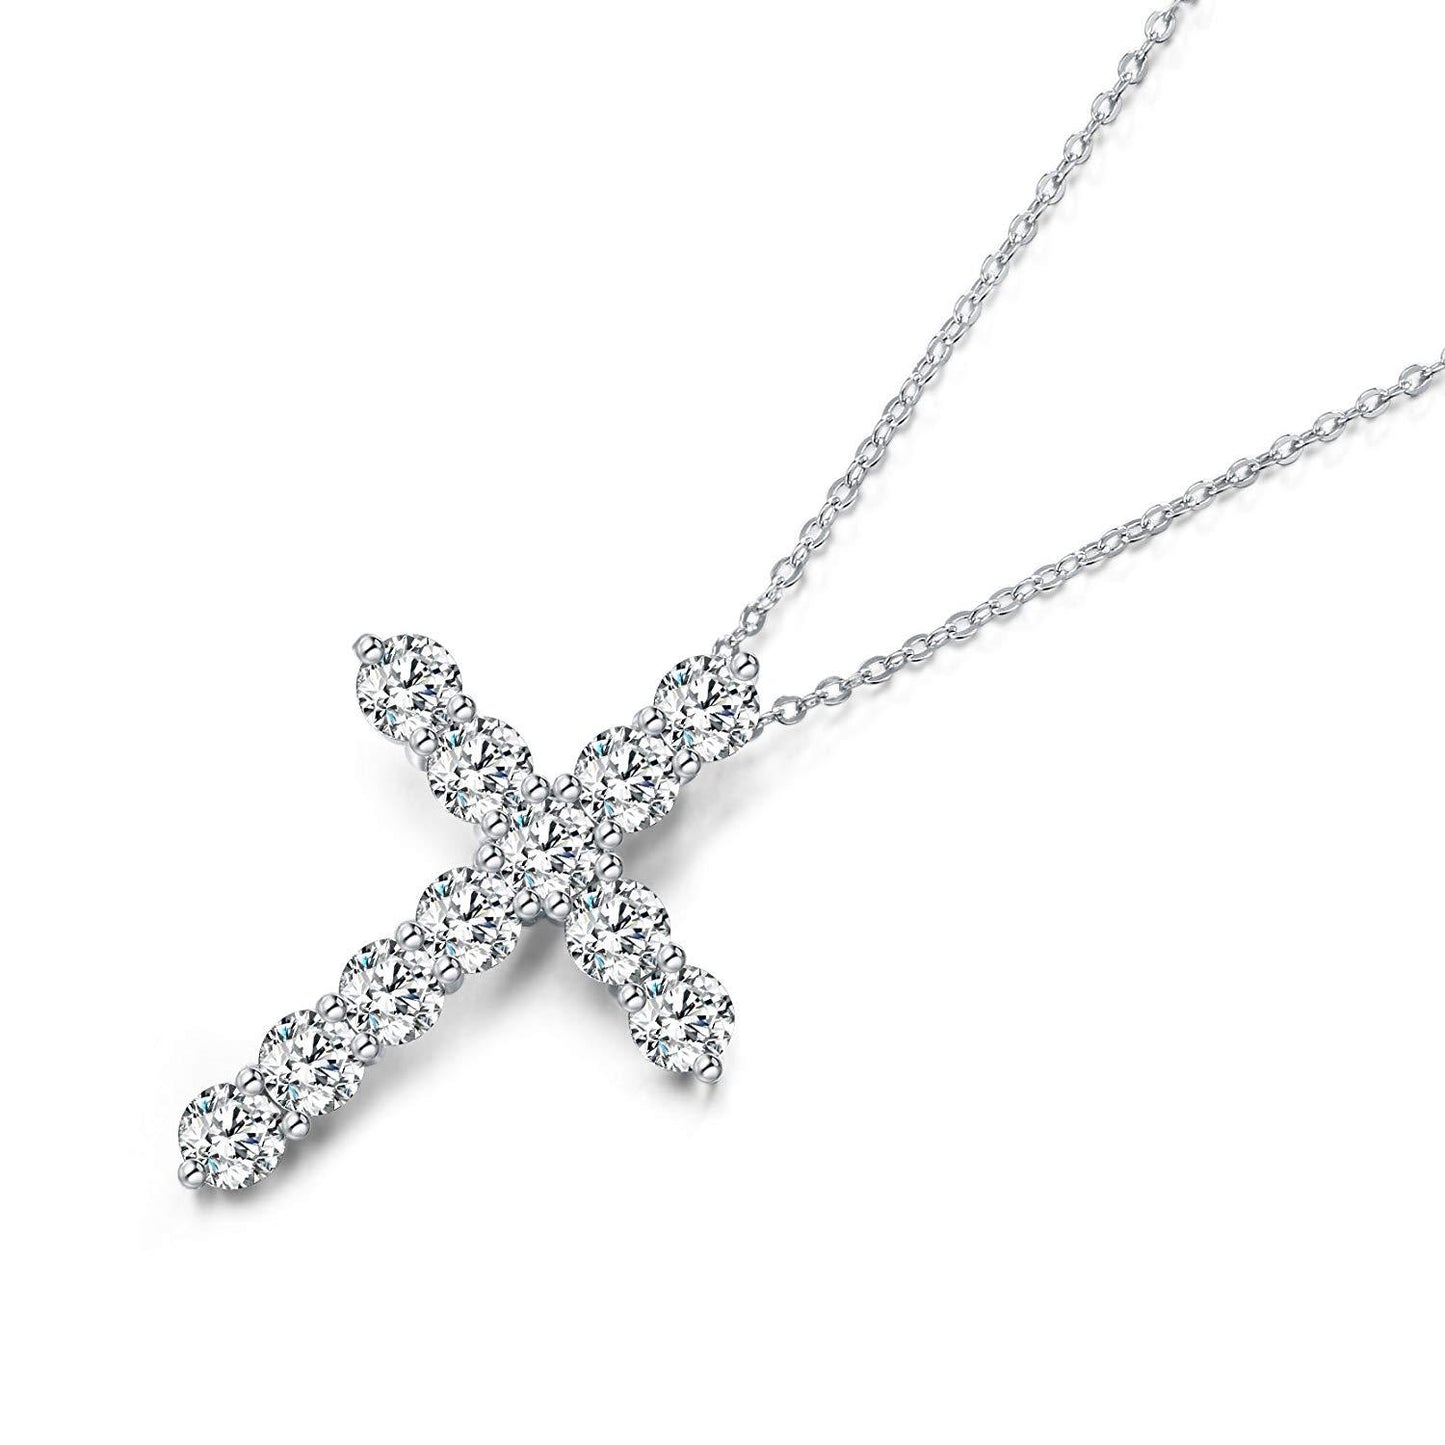 White Gold Cubic Zirconia Cross Necklaces for Women